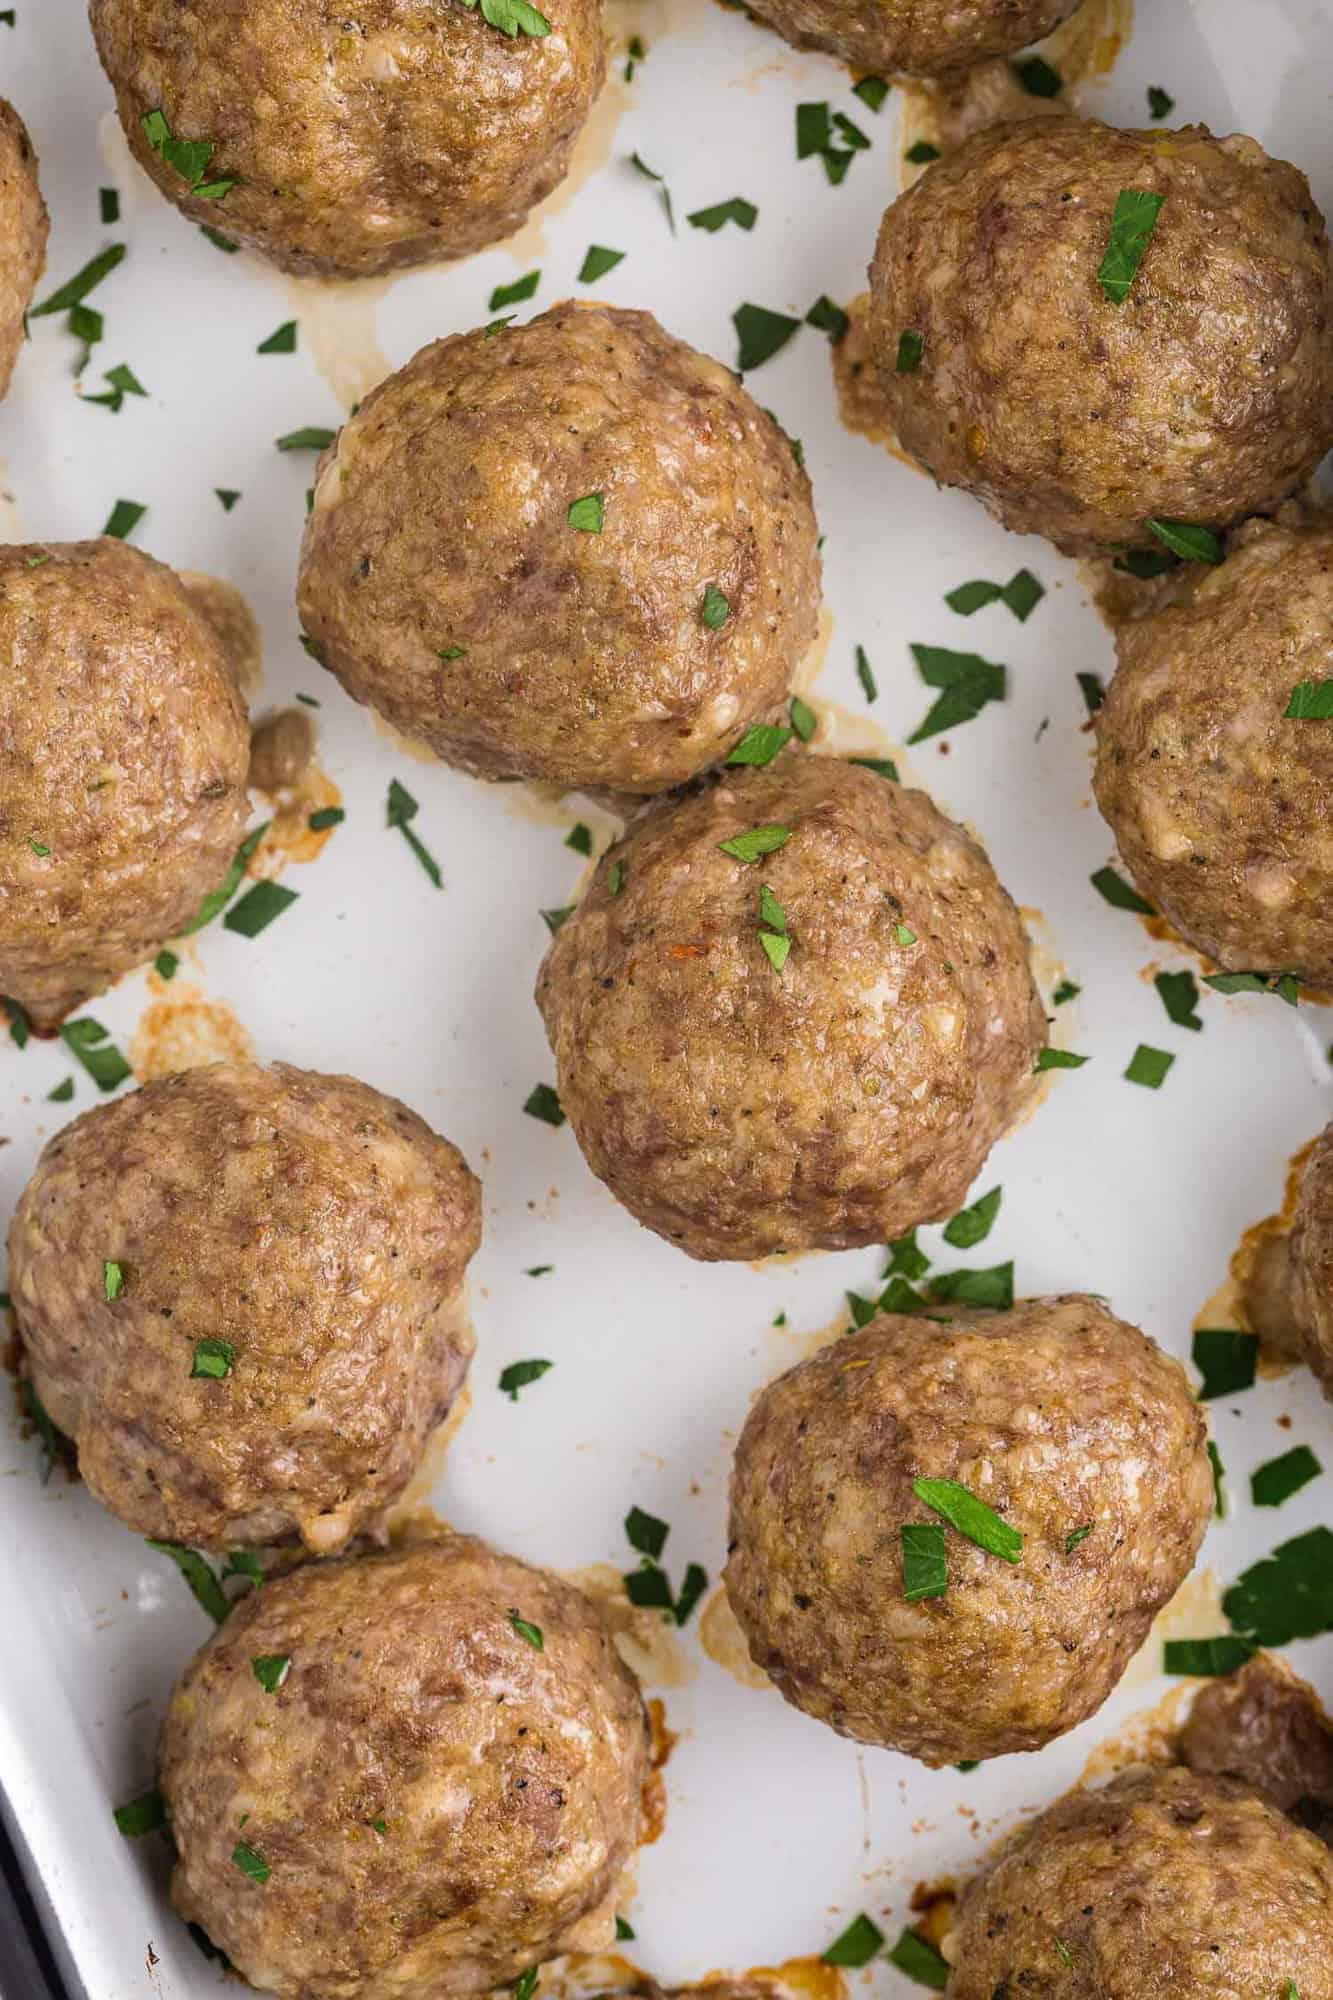 Overhead view of baked meatballs without sauce, sprinkled with parsley.